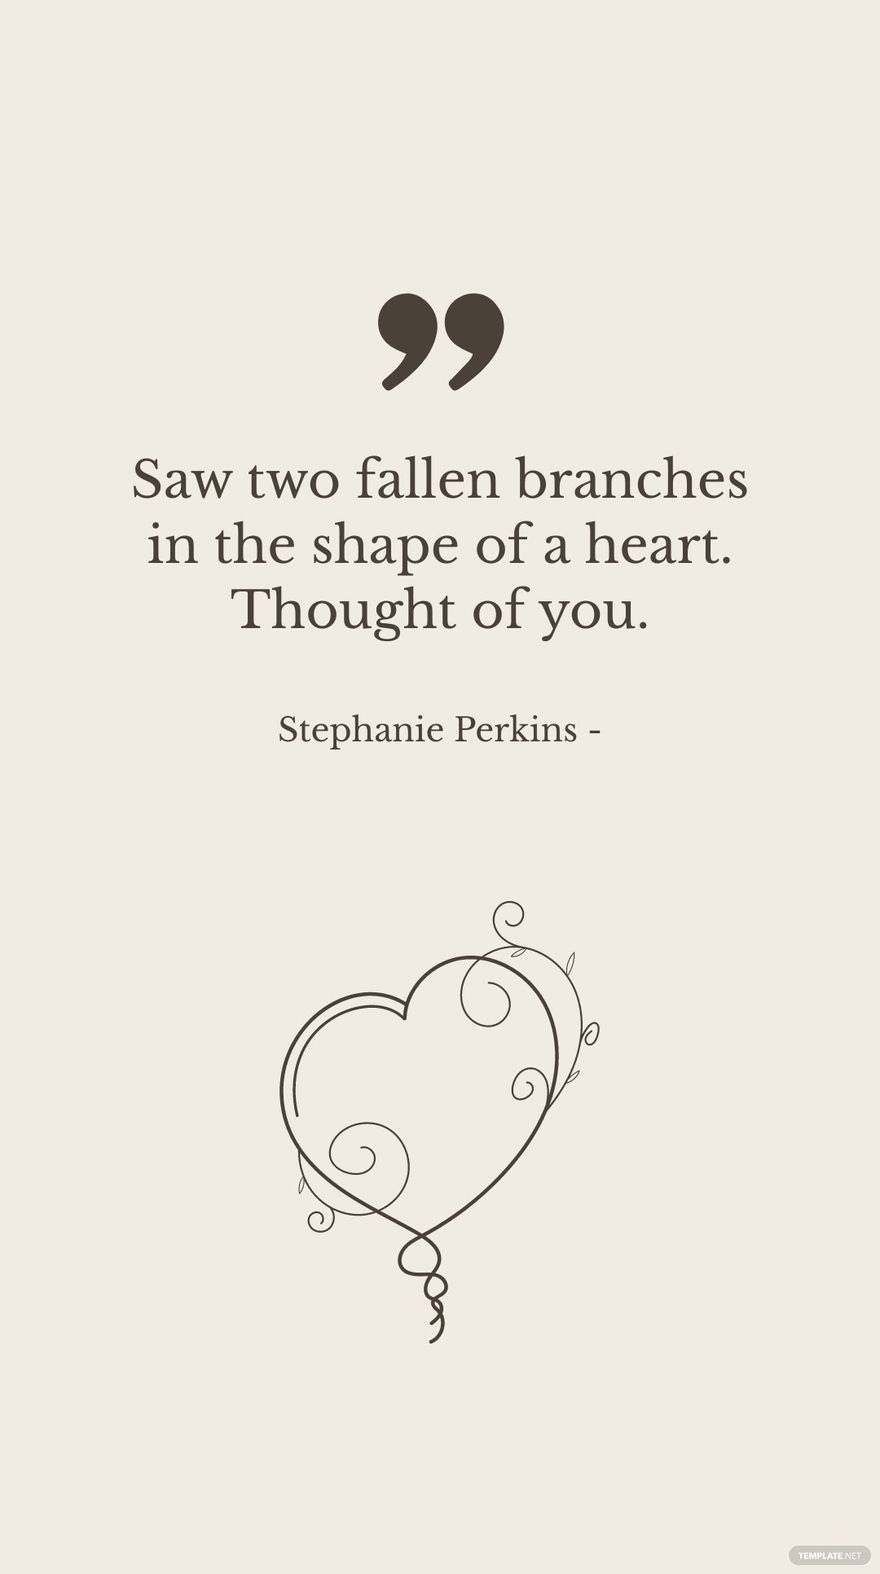 Free Stephanie Perkins - Saw two fallen branches in the shape of a heart. Thought of you.